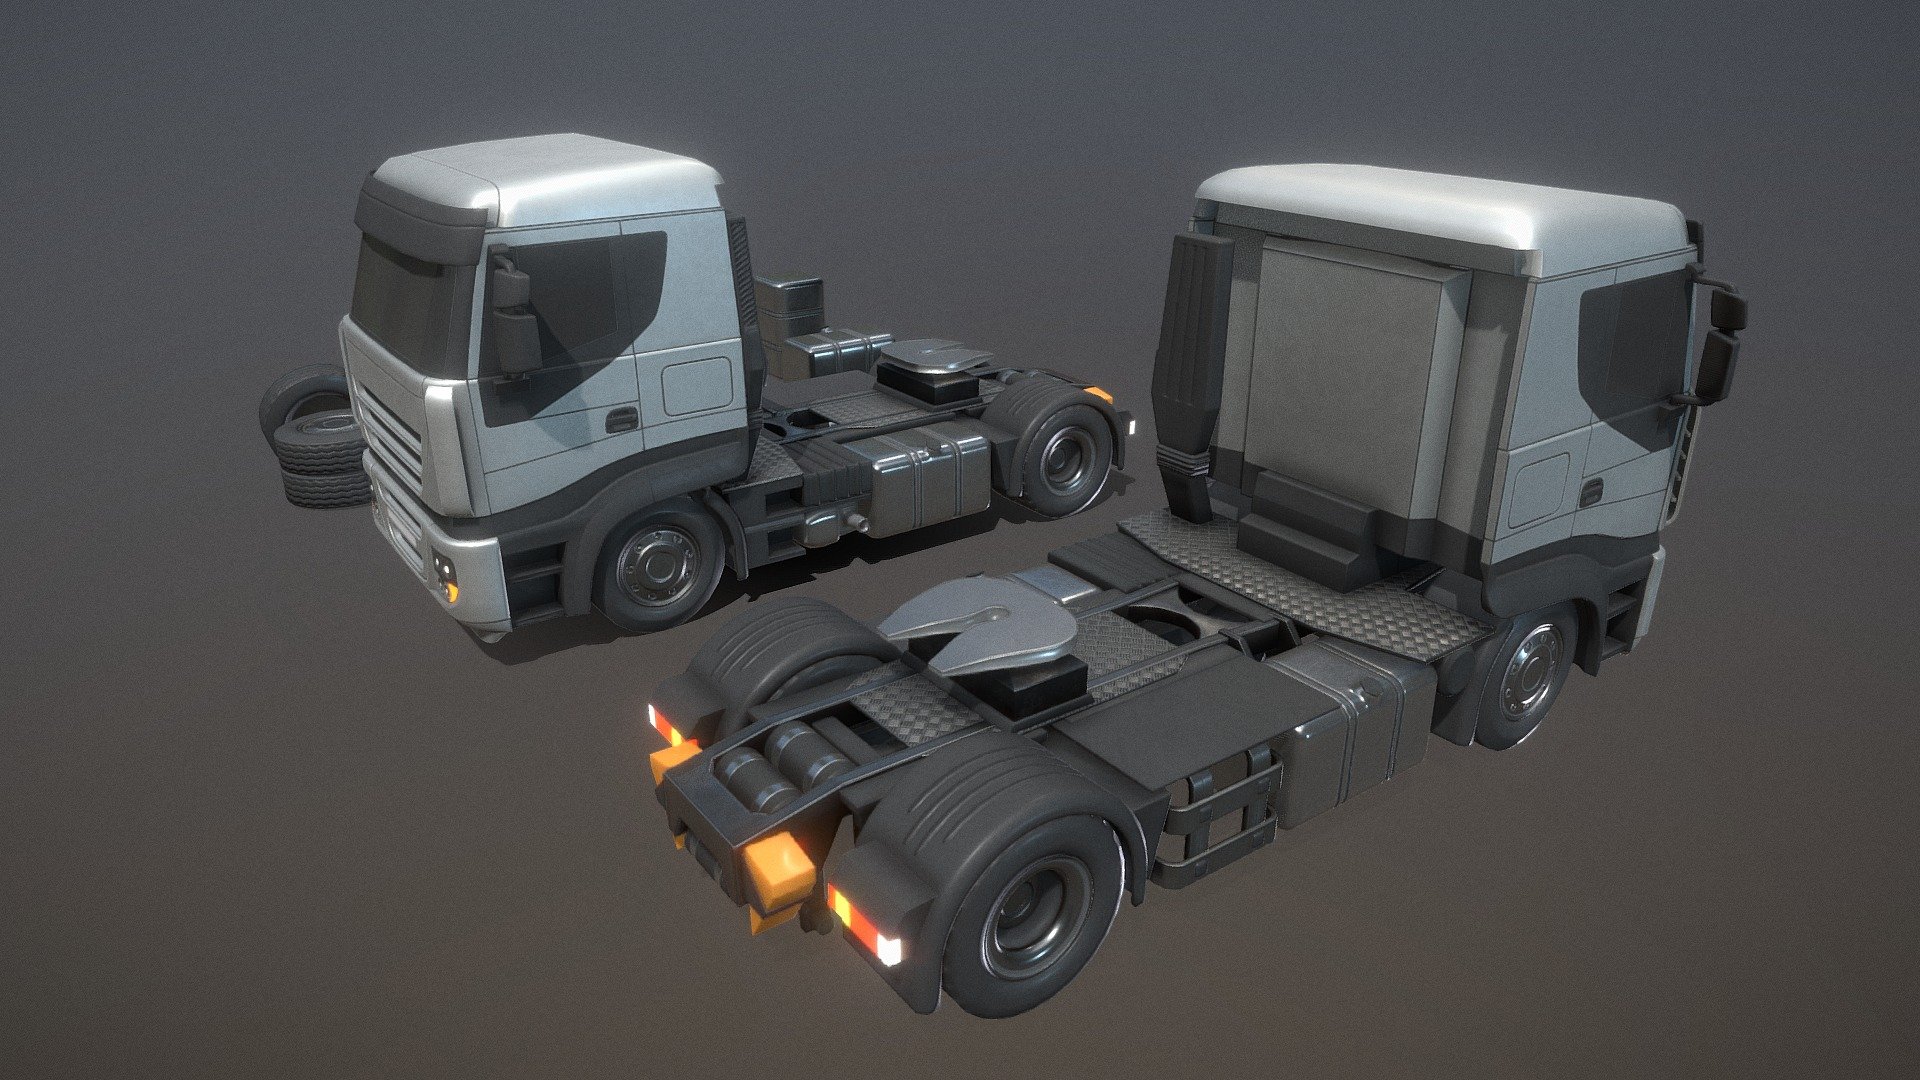 Here is the rigged low poly version of the truck with 2 axles. 


High-Poly Version

Included models:


Truck_2_axis_rigged 
Object Dimensions -  3.158m x 6.262m x 3.077m
Vertices = 6817
Polygons = 7853



Truck-2-axis_not_rigged 
Object Dimensions -  3.158m x 6.262m x 3.284m
Vertices = 7665
Polygons = 8787



Tank_truck_2_axis 
Object Dimensions -  0.703m x 1.162m x 0.732m
Vertices = 284
Polygons = 396



Wheel_1_truck-2-axis 
Object Dimensions -  0.370m x 1.035m x 1.035m
Vertices = 122
Polygons = 144



Wheel_2_truck-2-axis 
Object Dimensions -  0.671m x 1.029m x 1.029m
Vertices = 302
Polygons = 324


Last update:
23:17:34  13.06.22




Demo Video



3d modeled, textured, rigged and animated by 3DHaupt with Blender-2.93


 - Truck 2-Axis (Rigged Low-Poly Version) - Buy Royalty Free 3D model by VIS-All-3D (@VIS-All) 3d model